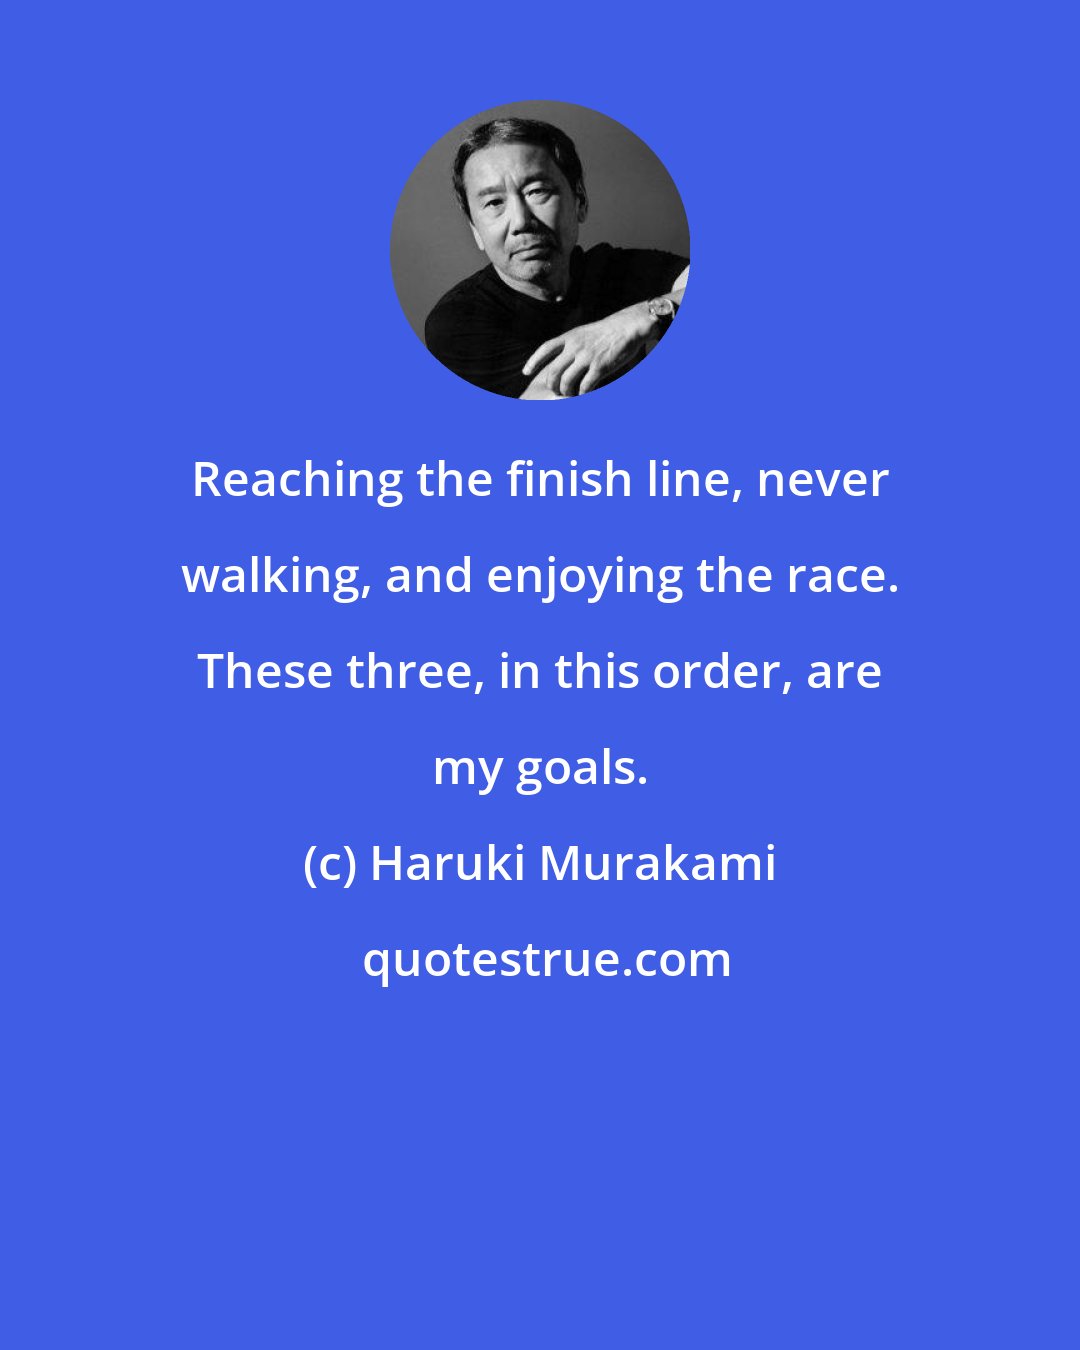 Haruki Murakami: Reaching the finish line, never walking, and enjoying the race. These three, in this order, are my goals.